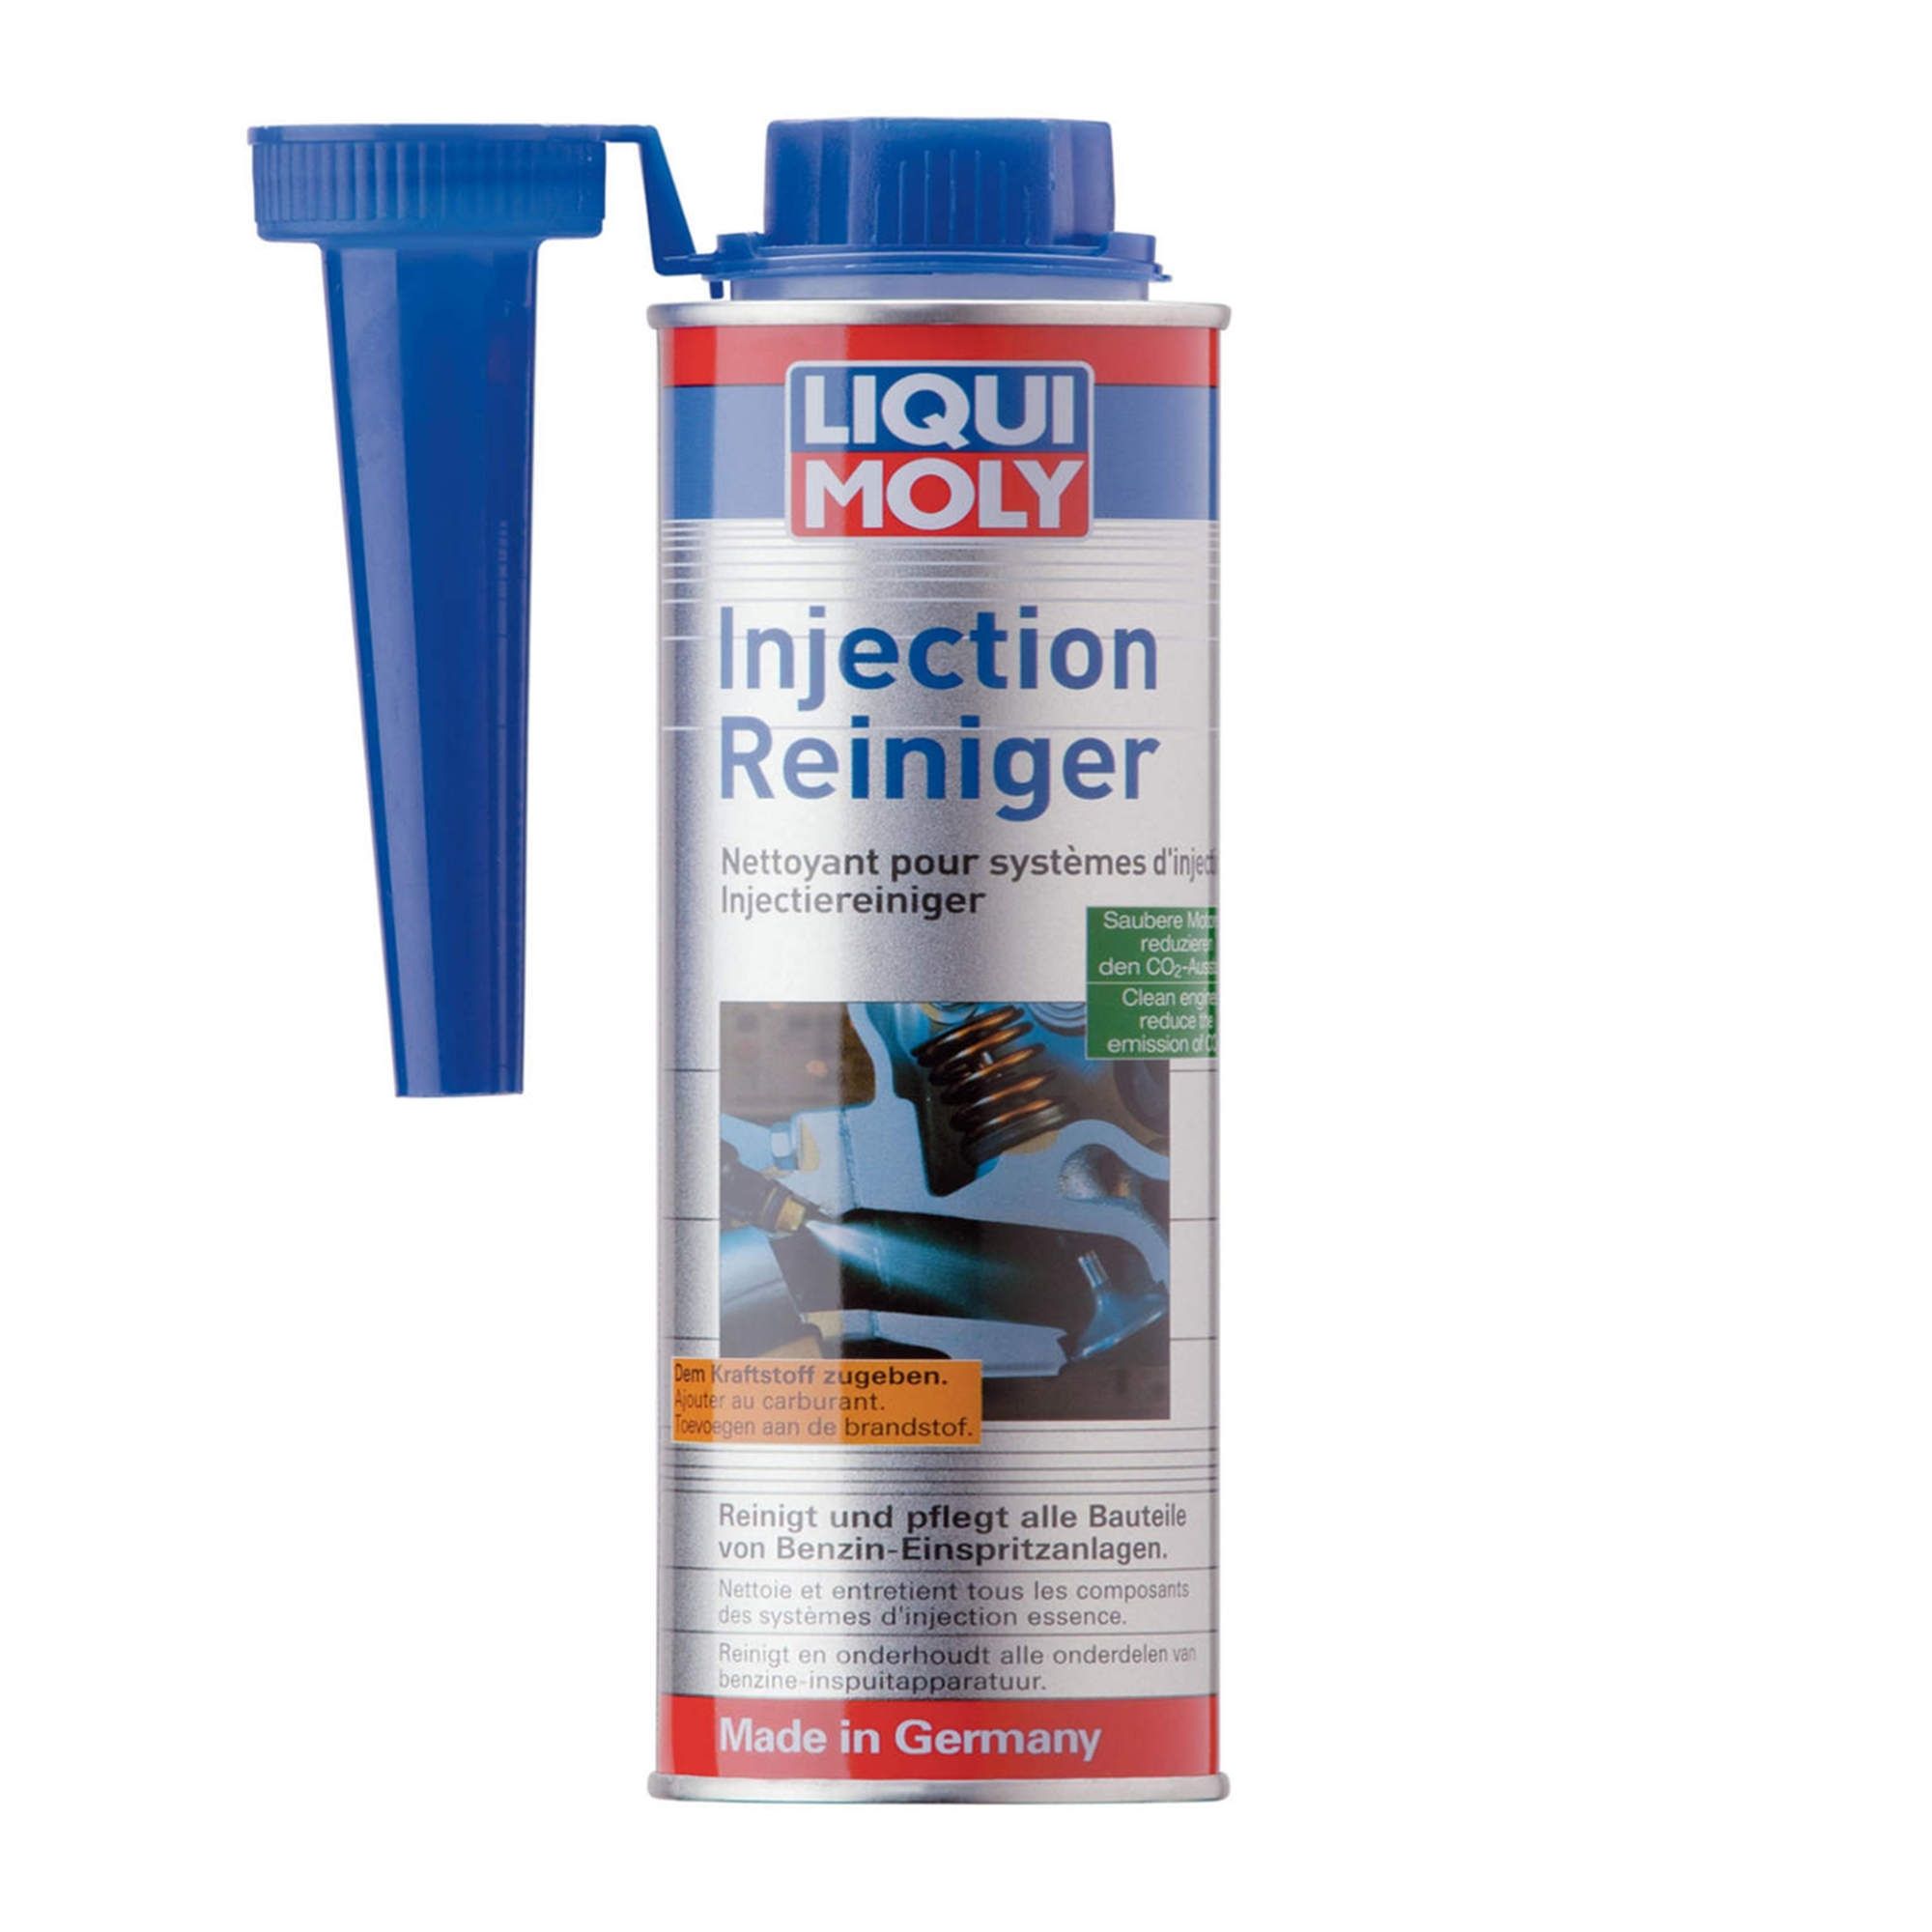 LIQUI MOLY 1803 INJECTION CLEANER 300ML